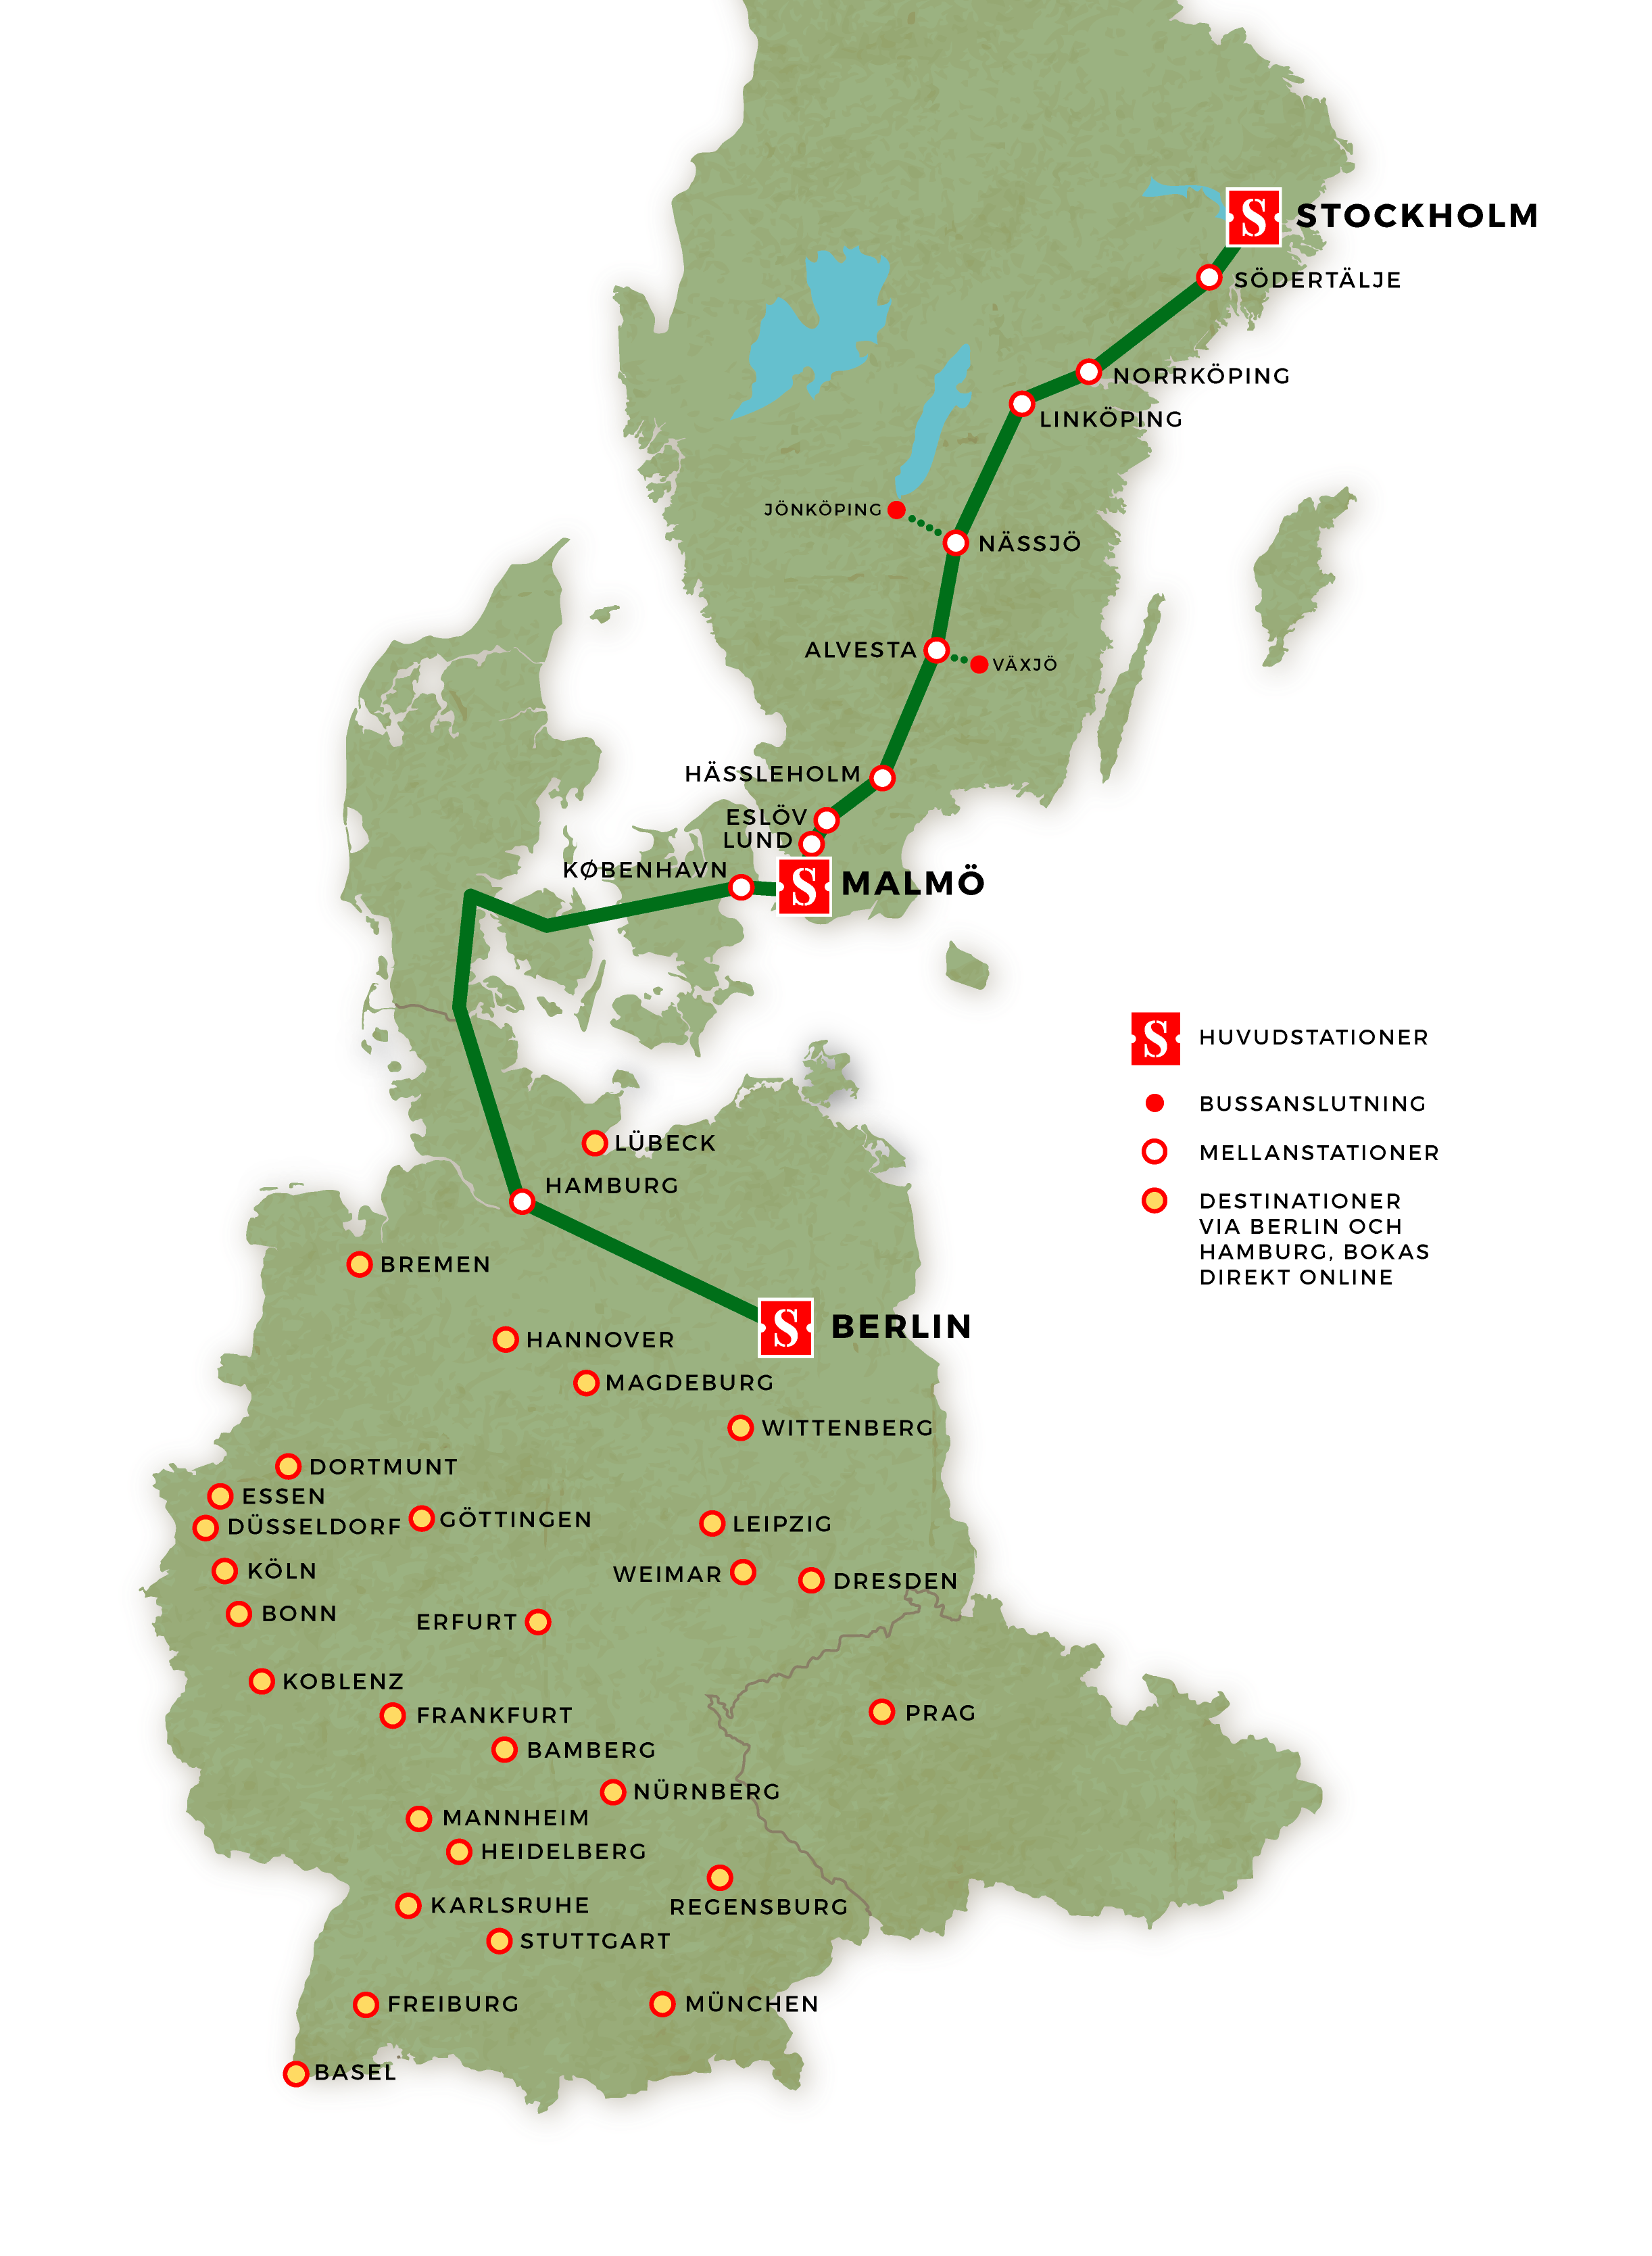 sweden to germany travel time by train